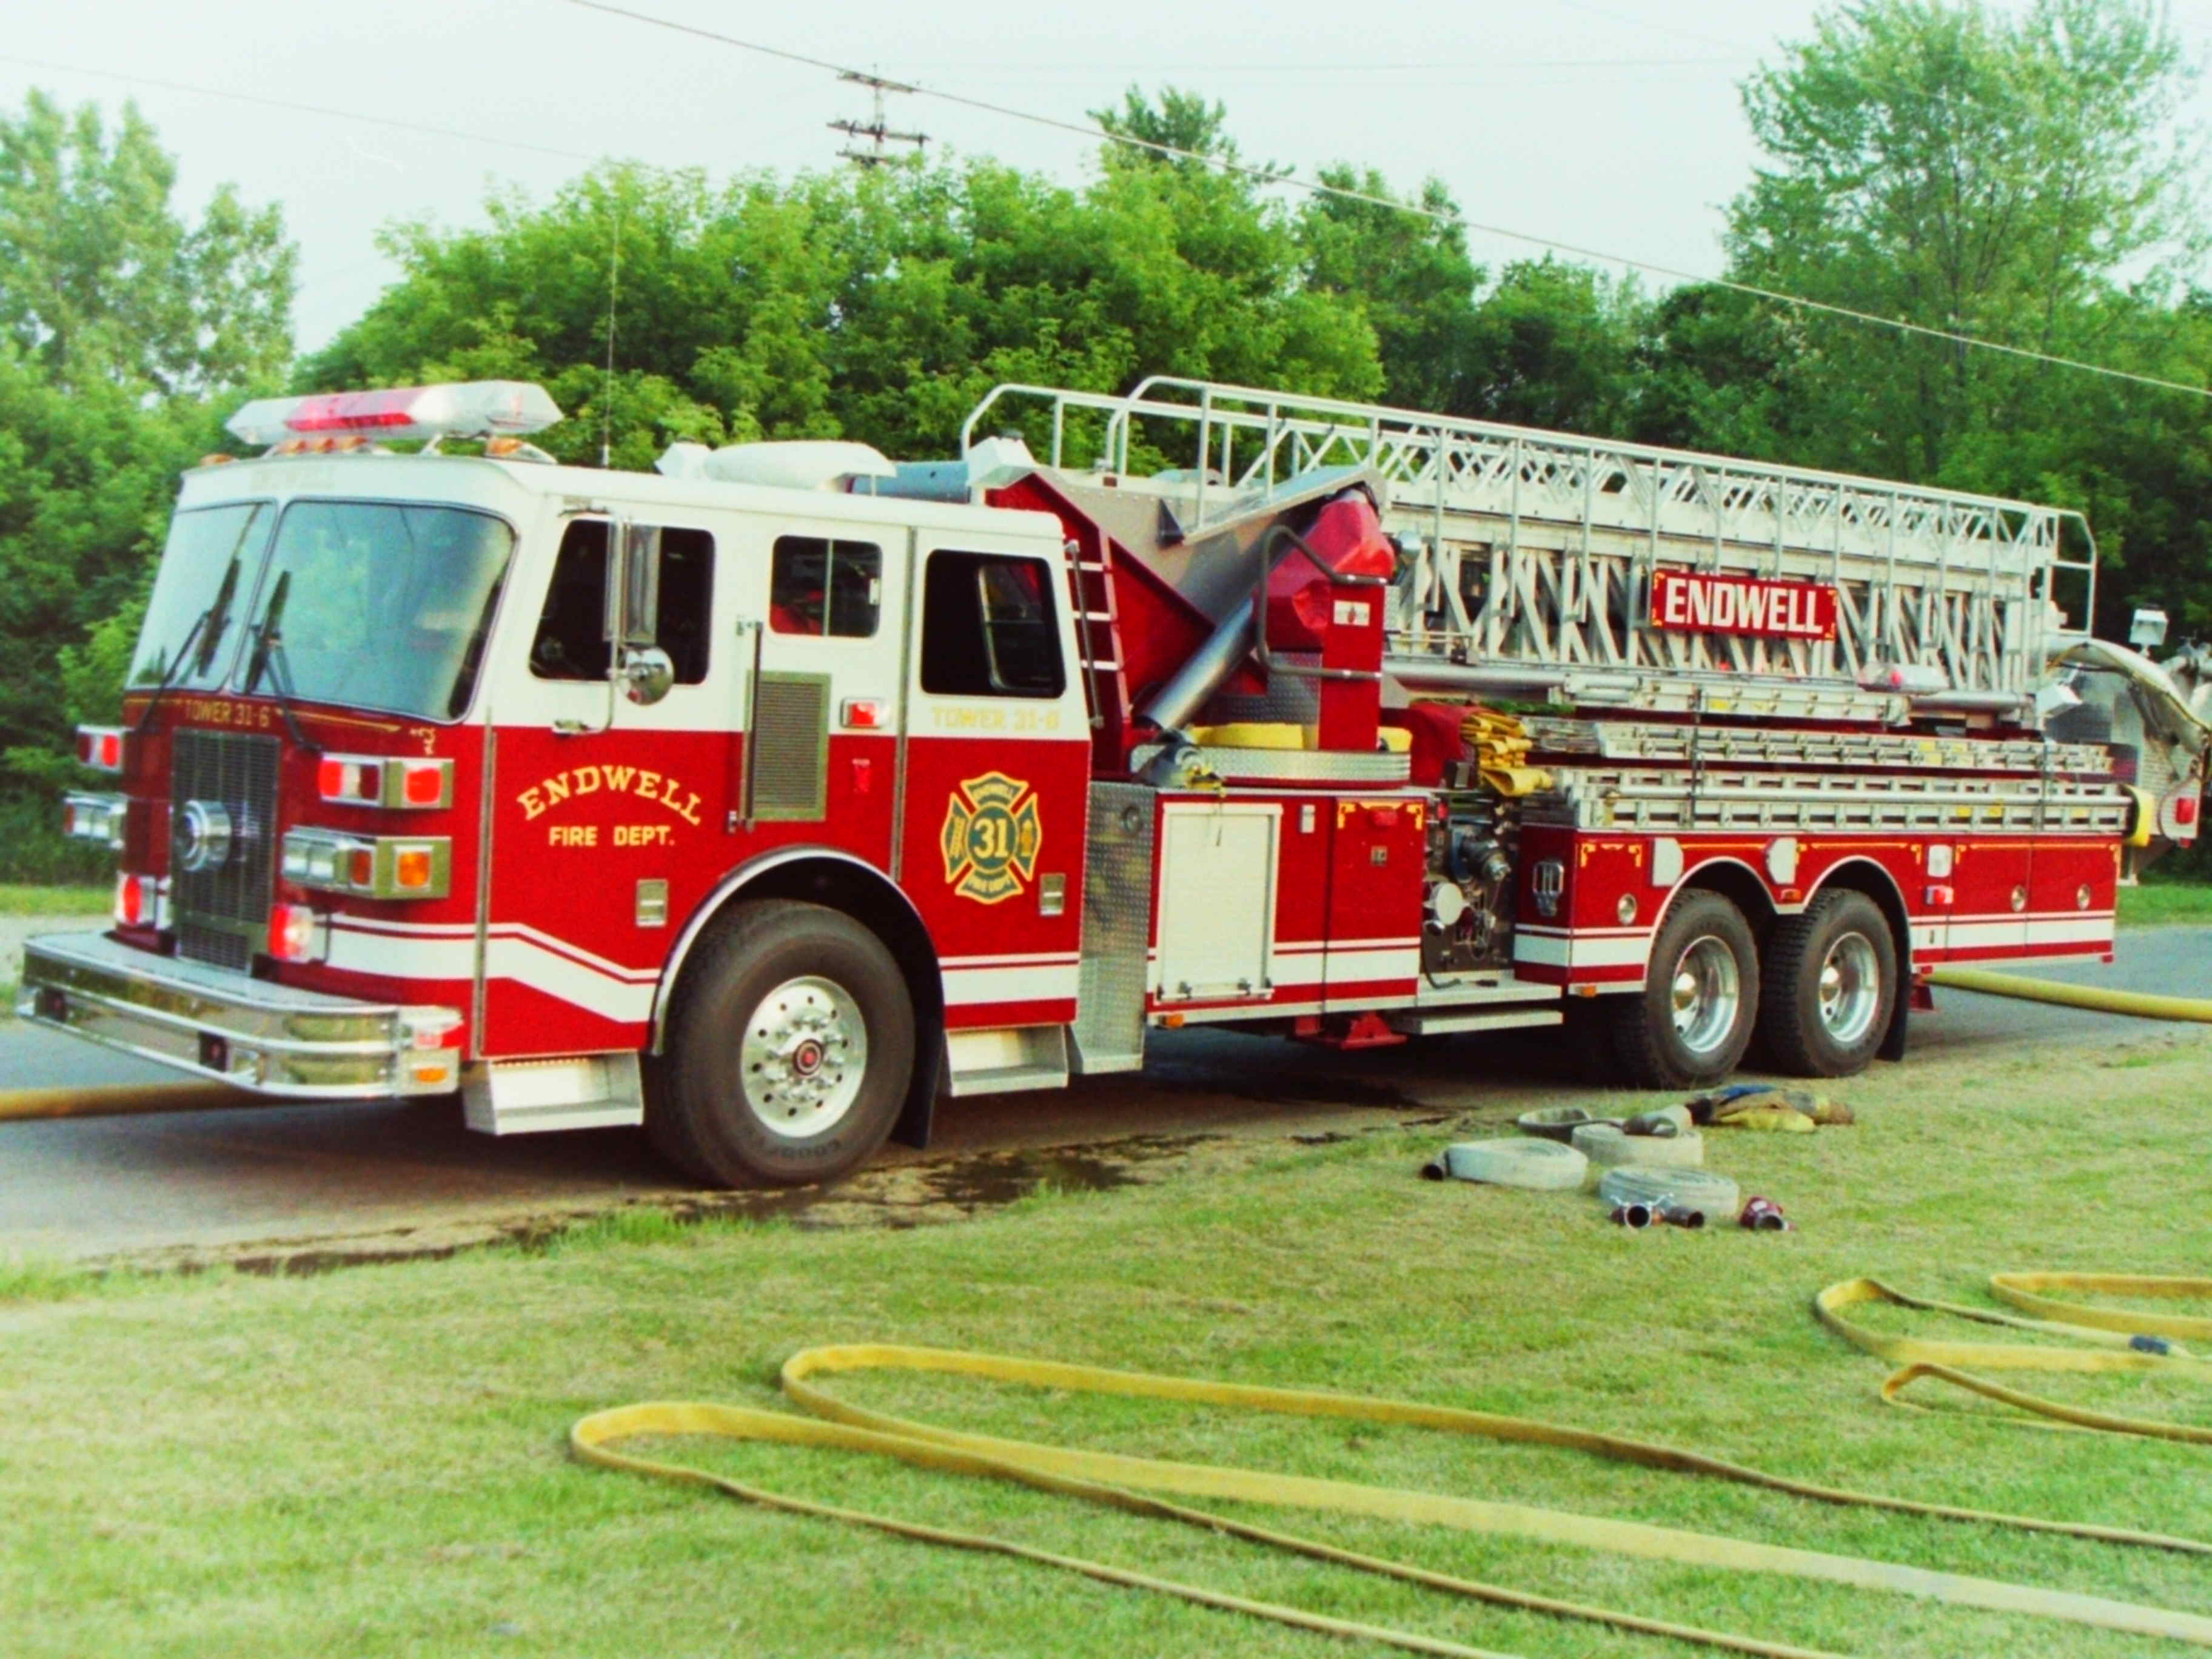 11-31-95  Response - Tower 6, Cooking Oil Spill